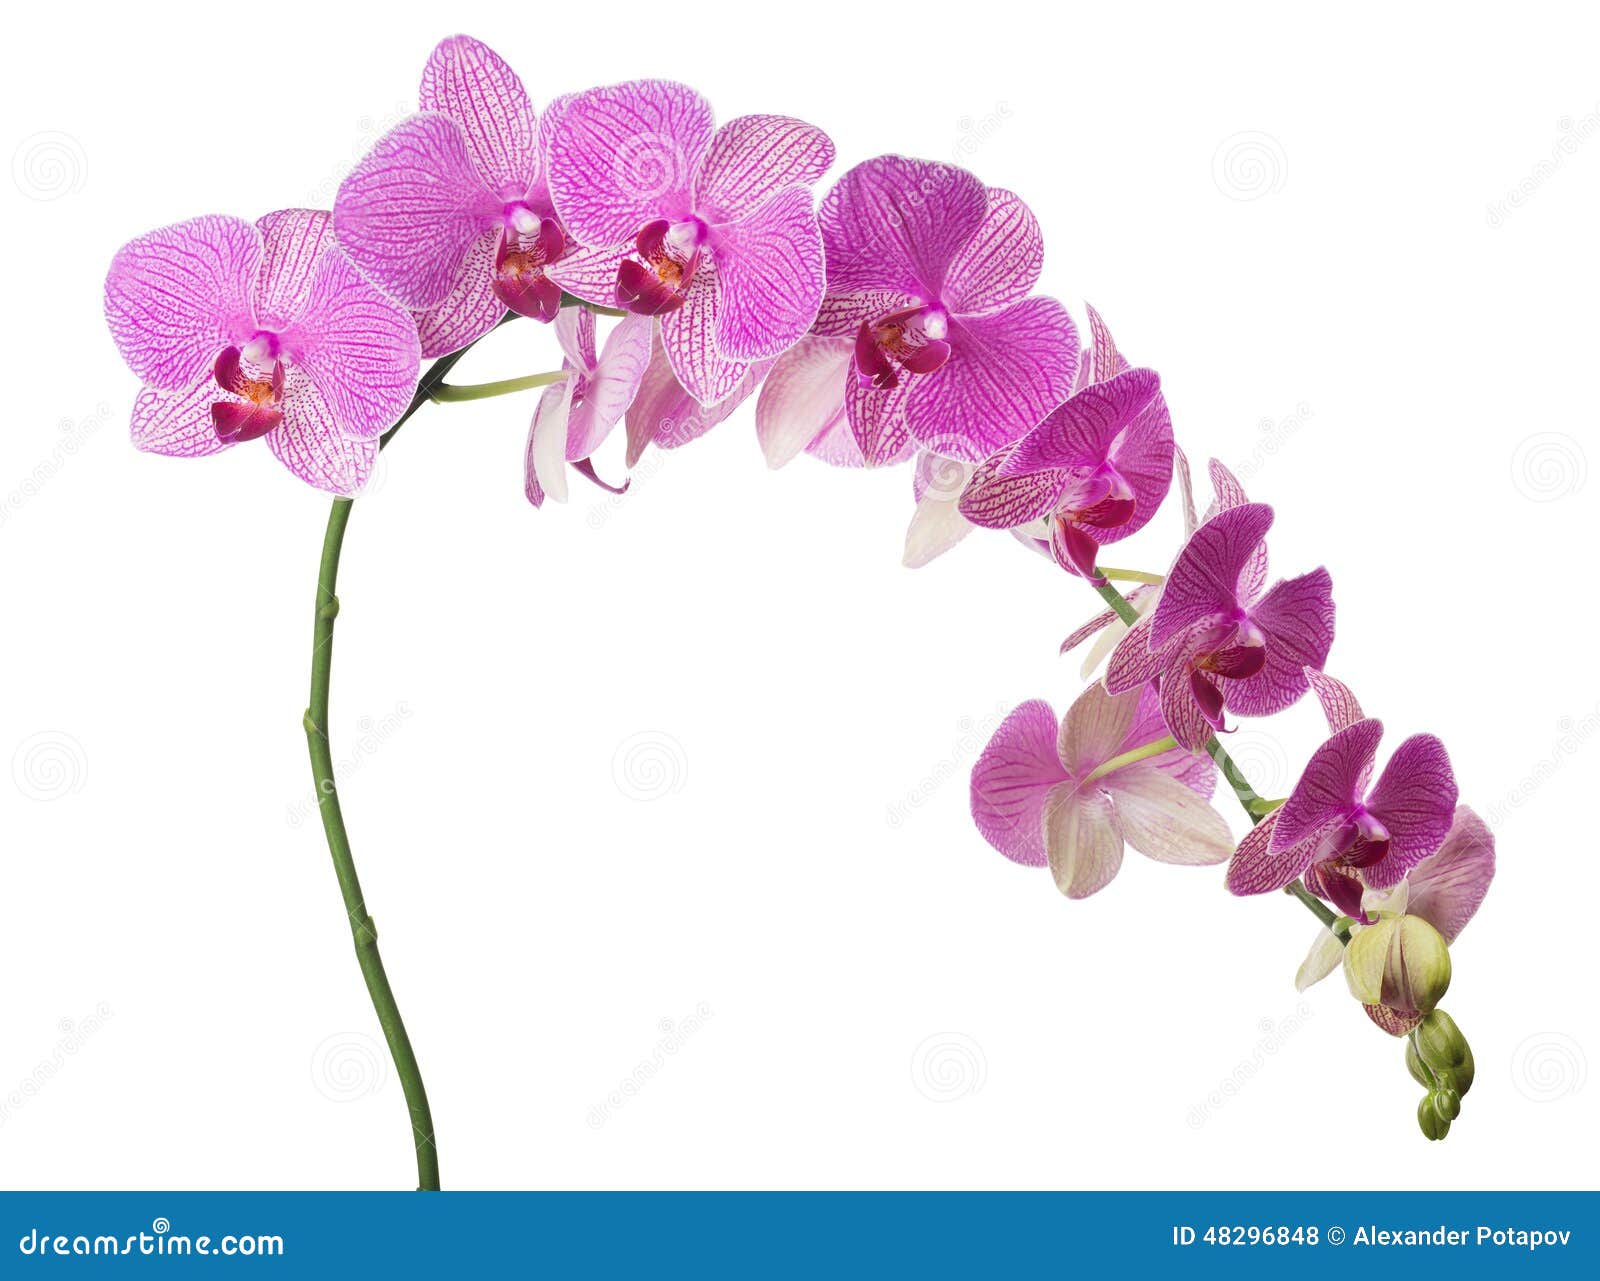 Premium Photo  Branch of orchid flowers in neon light close up